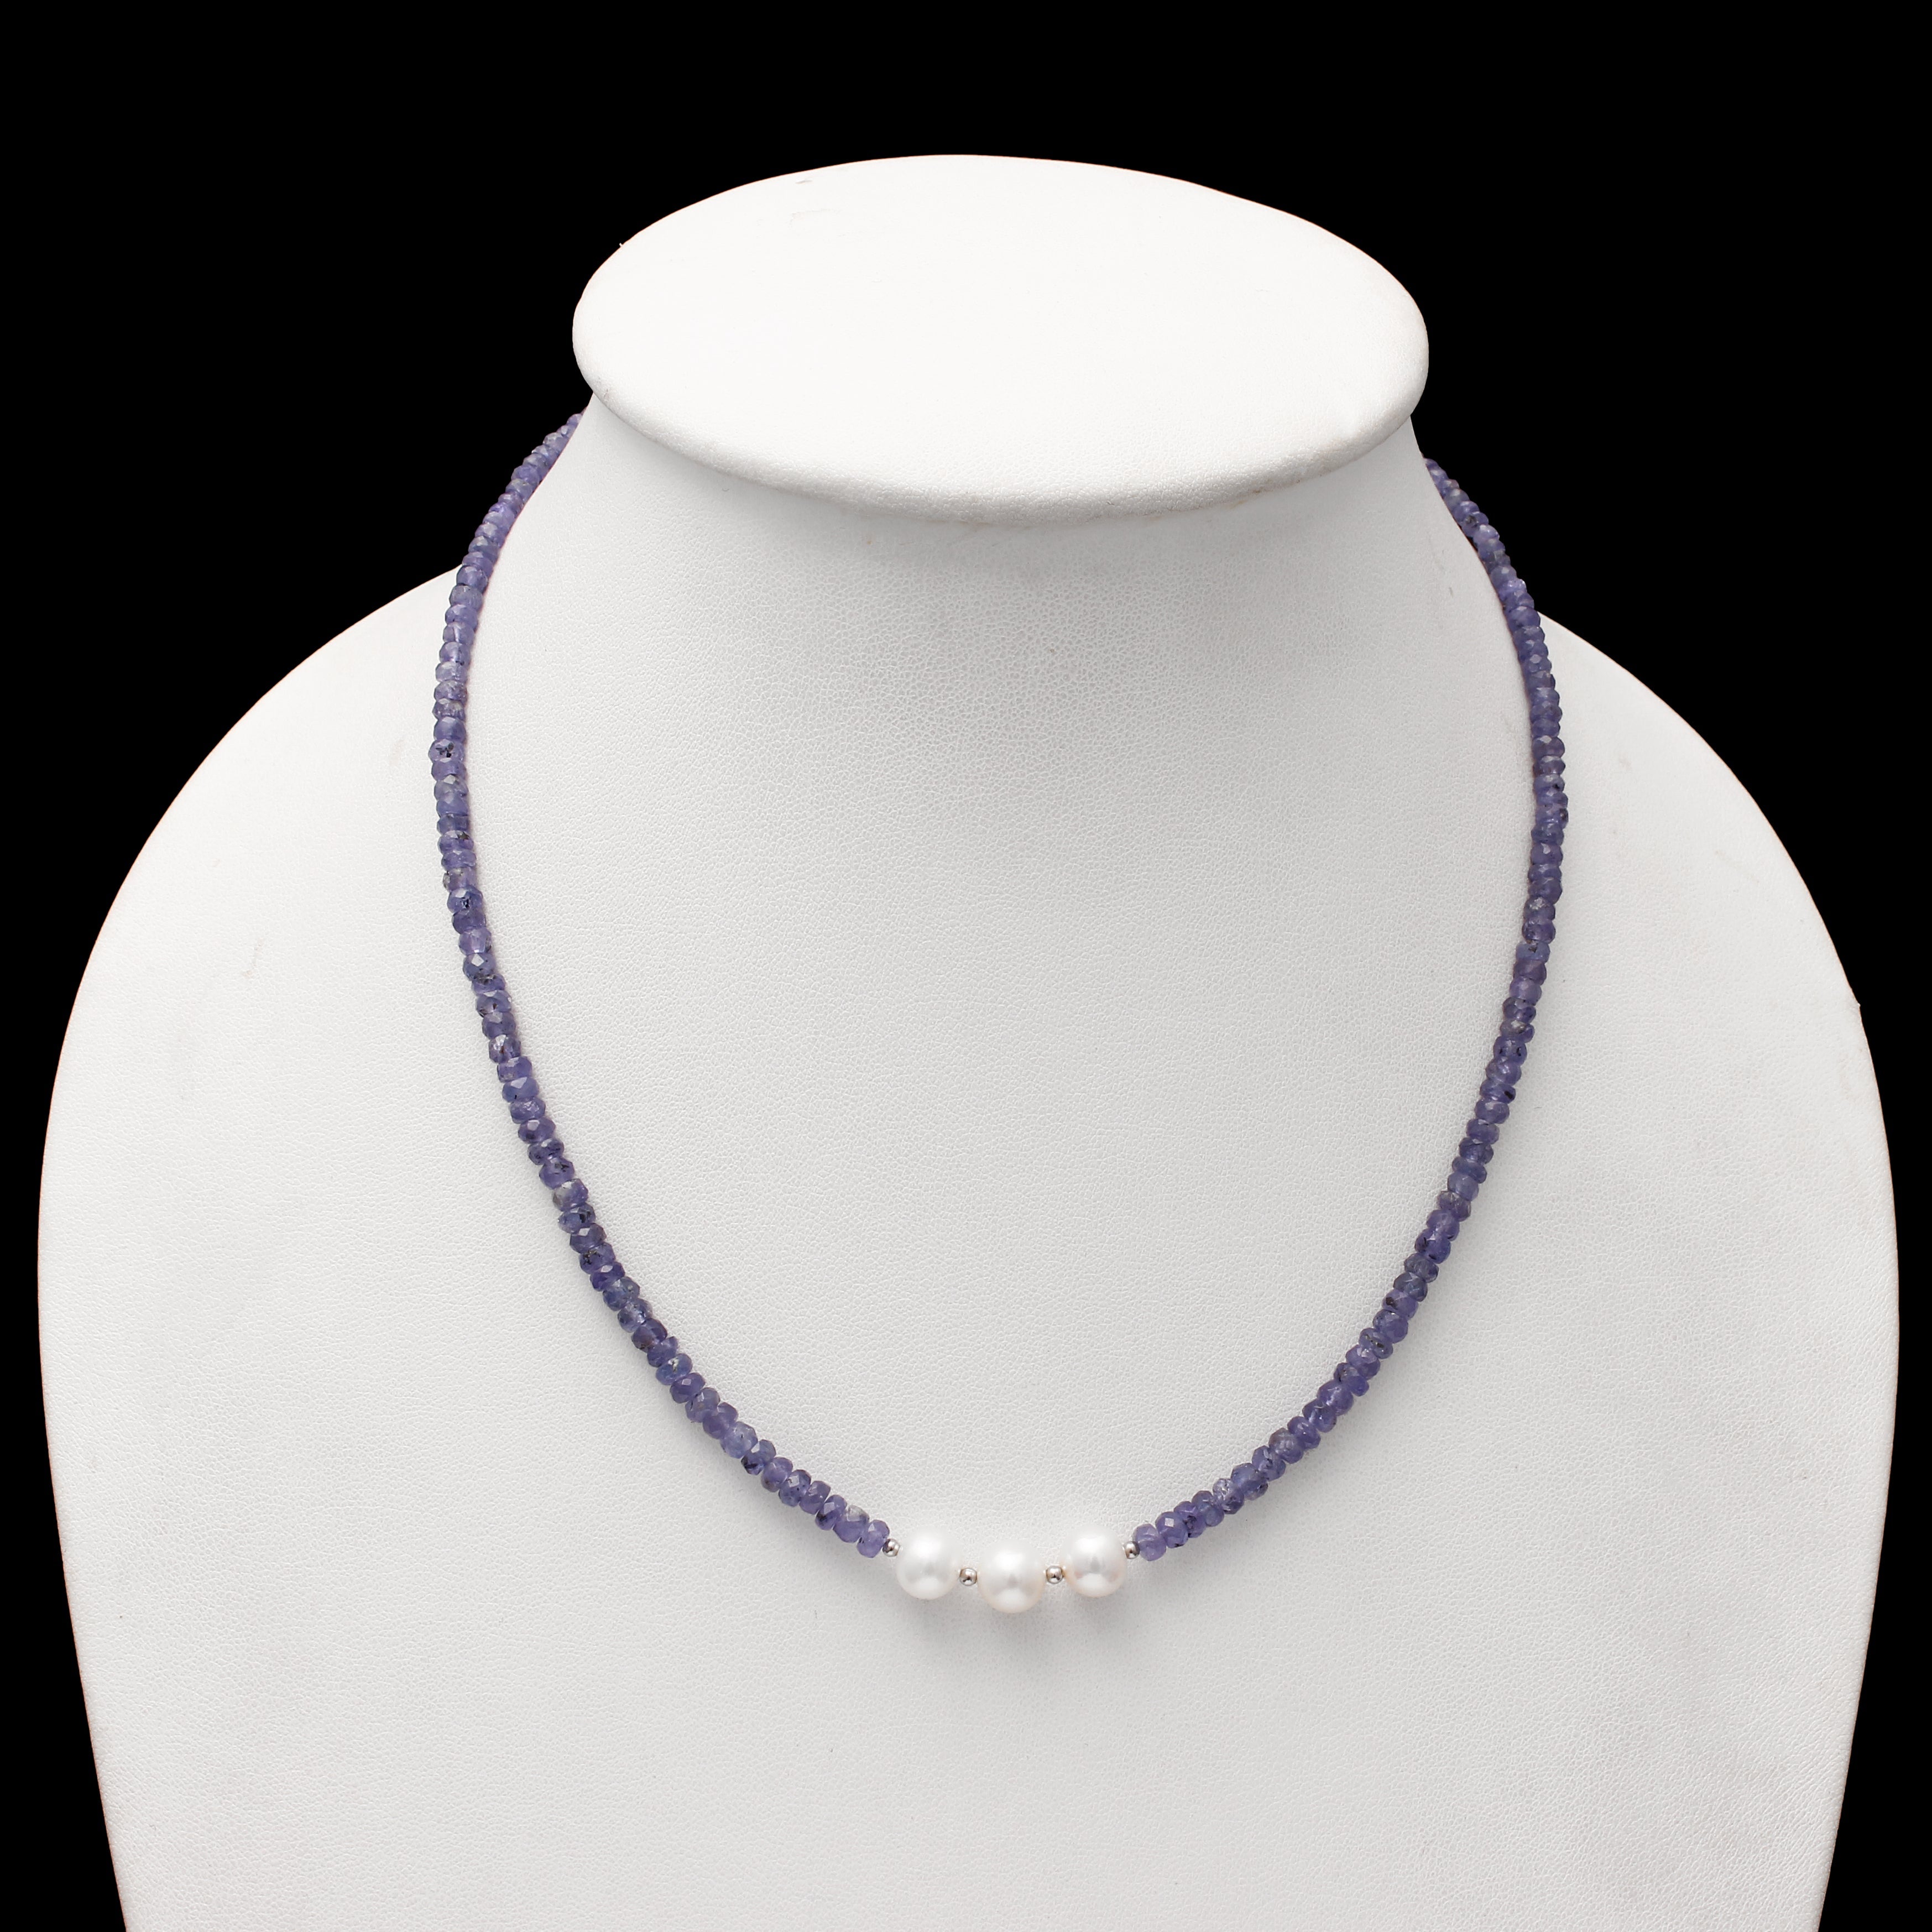 Buy Coral tanzanite gold pearl necklace at Krishna Jewellers,Pearls and Gems